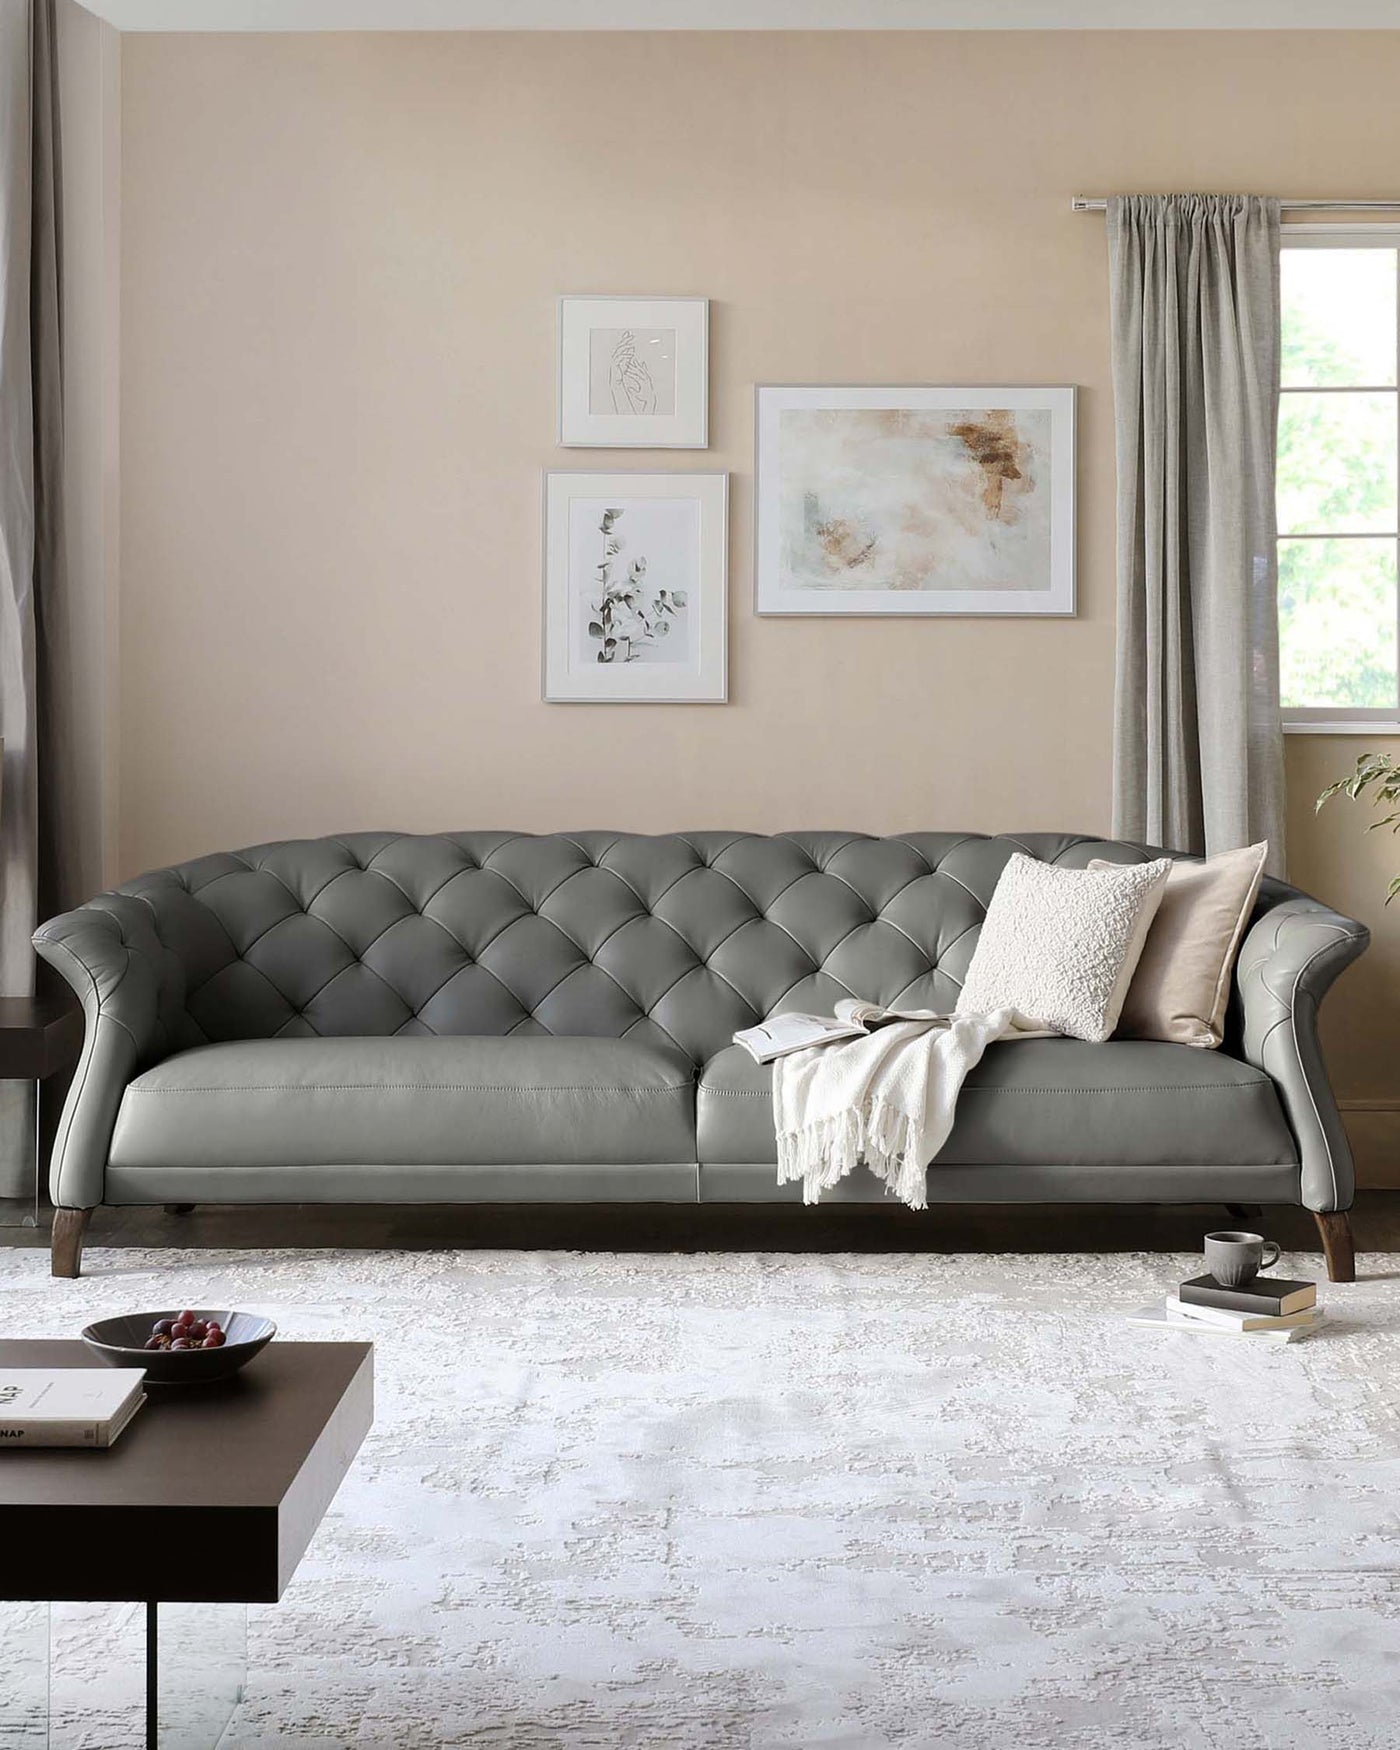 Elegant grey tufted Chesterfield sofa with a rolled backrest and arms, featuring button detailing and dark wooden legs, paired with a simplistic dark wooden coffee table. A cosy white throw blanket and a cushion are casually draped over one side of the sofa for an inviting look.